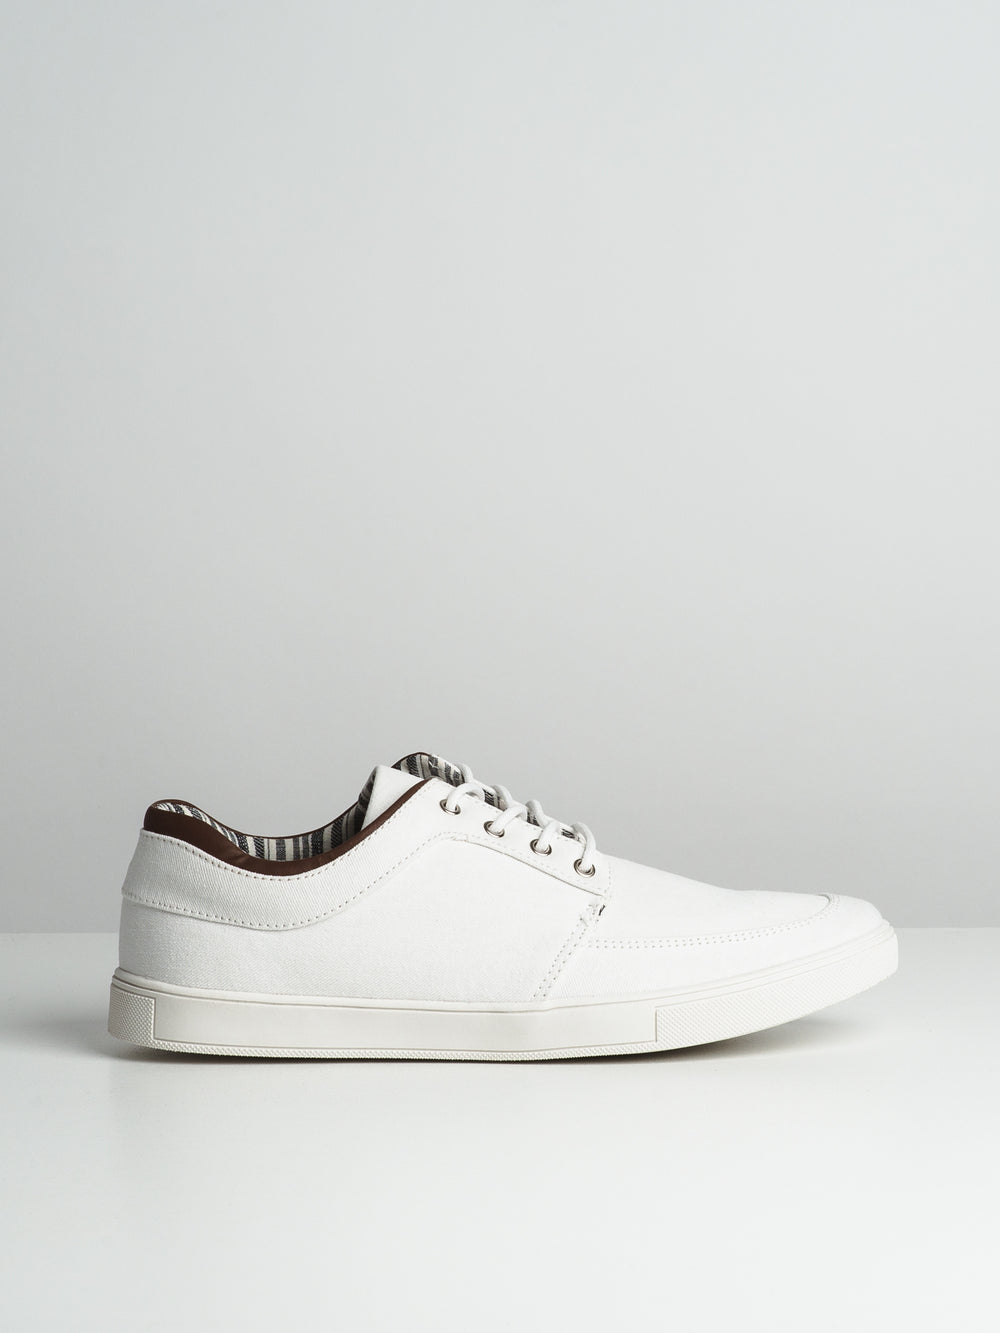 MENS WESTON - WHITE-D1 - CLEARANCE